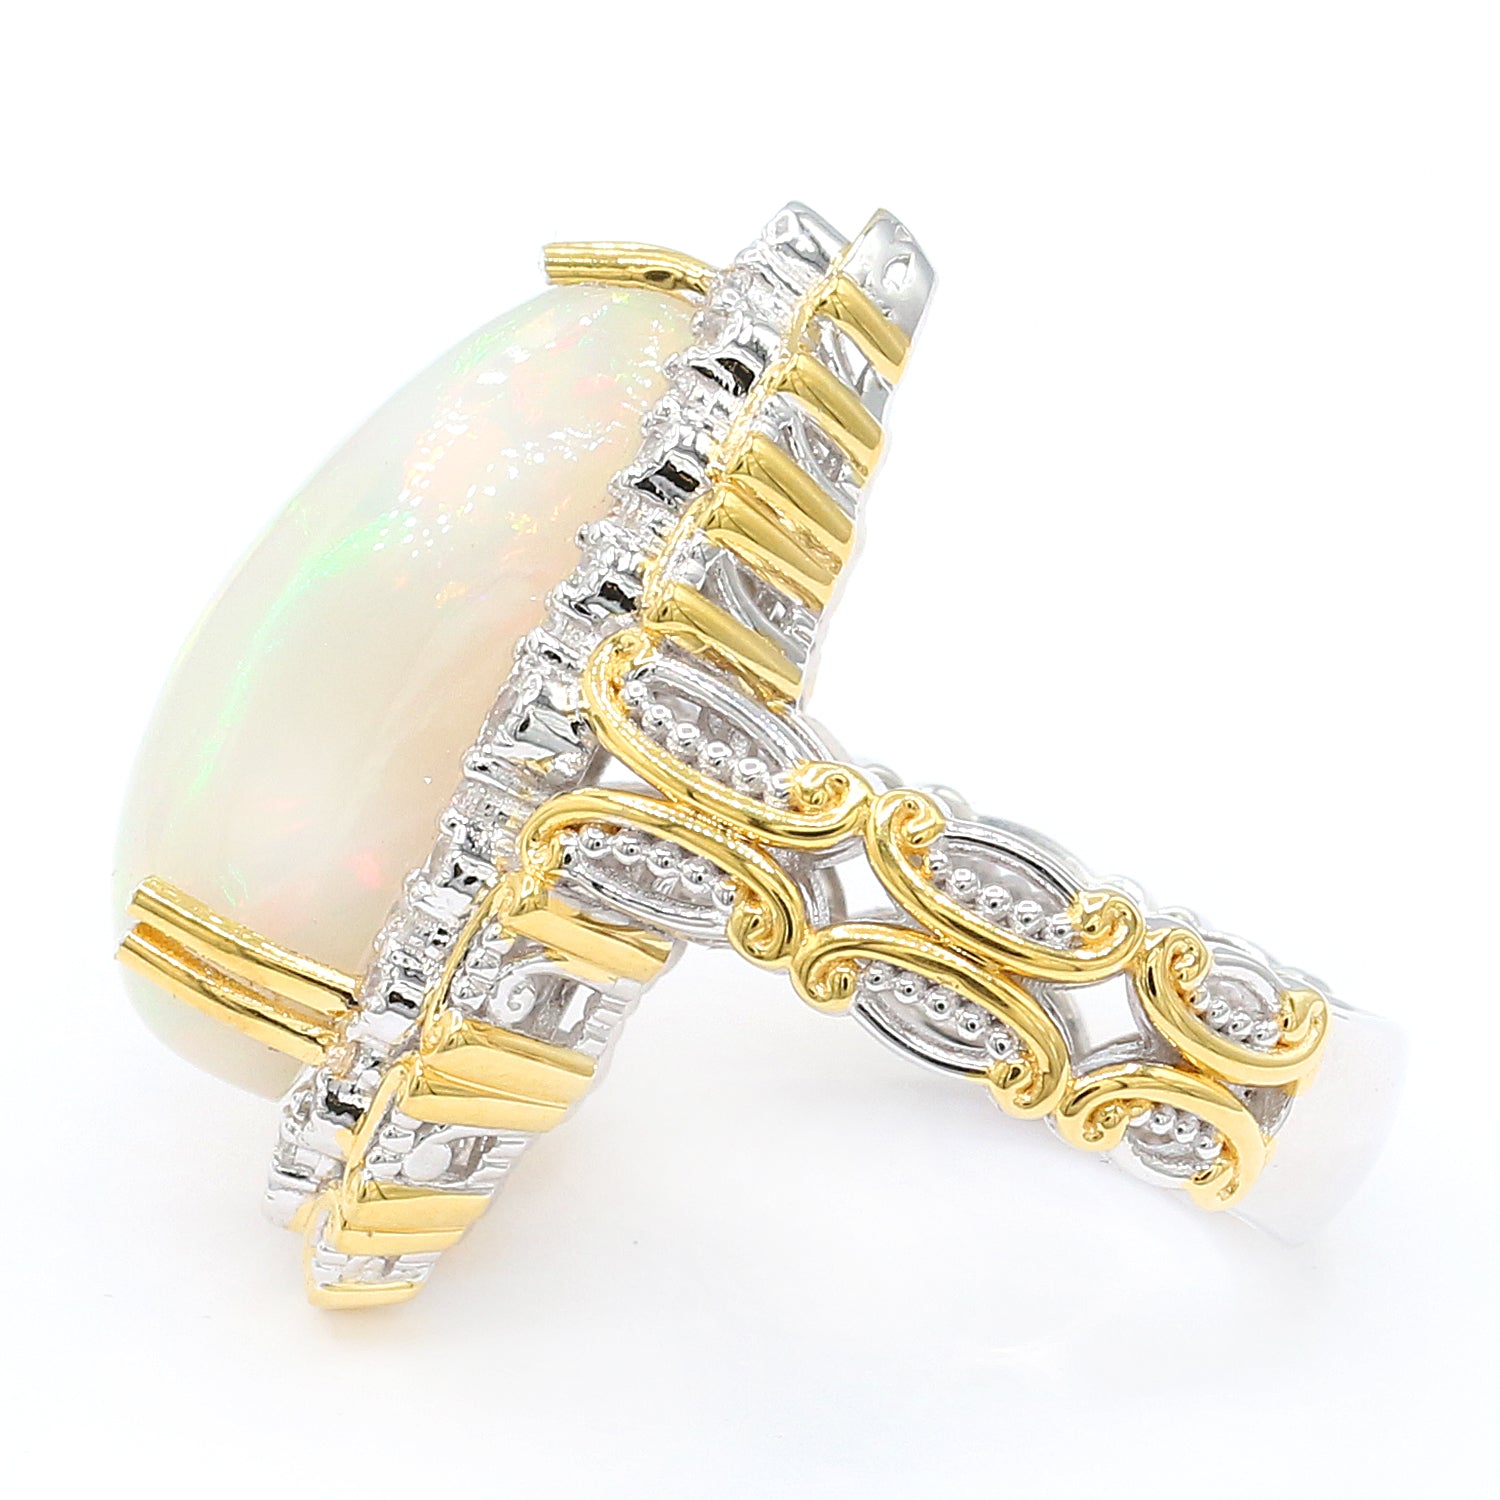 Limited Edition Gems en Vogue Luxe, One-of-a-Kind 12.15ctw Ethiopian Opal & White Zircon Halo Ring